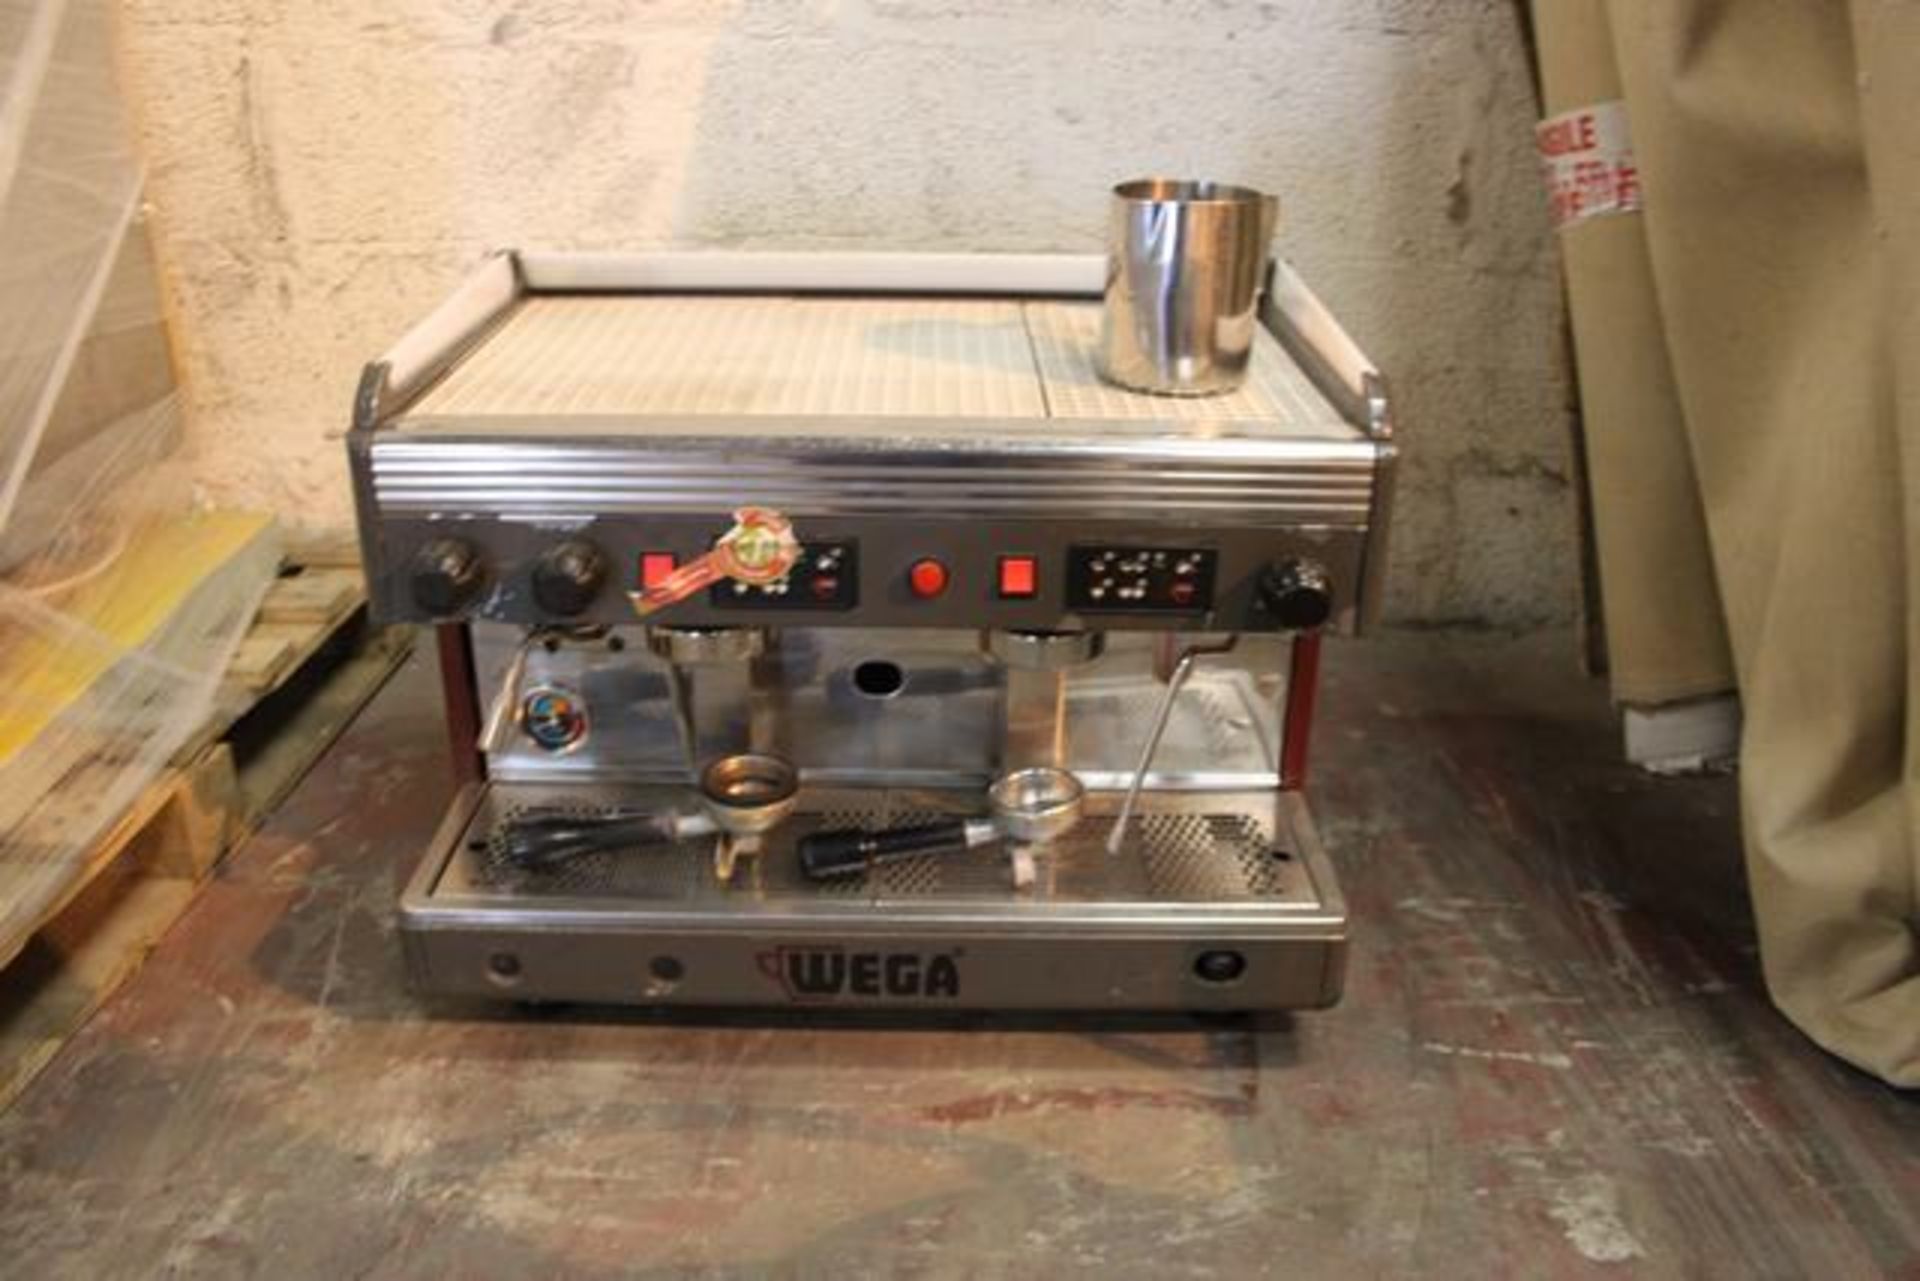 Wega Nova 2 Group Electronic coffee machine Four programmable doses per group, with manual brewing